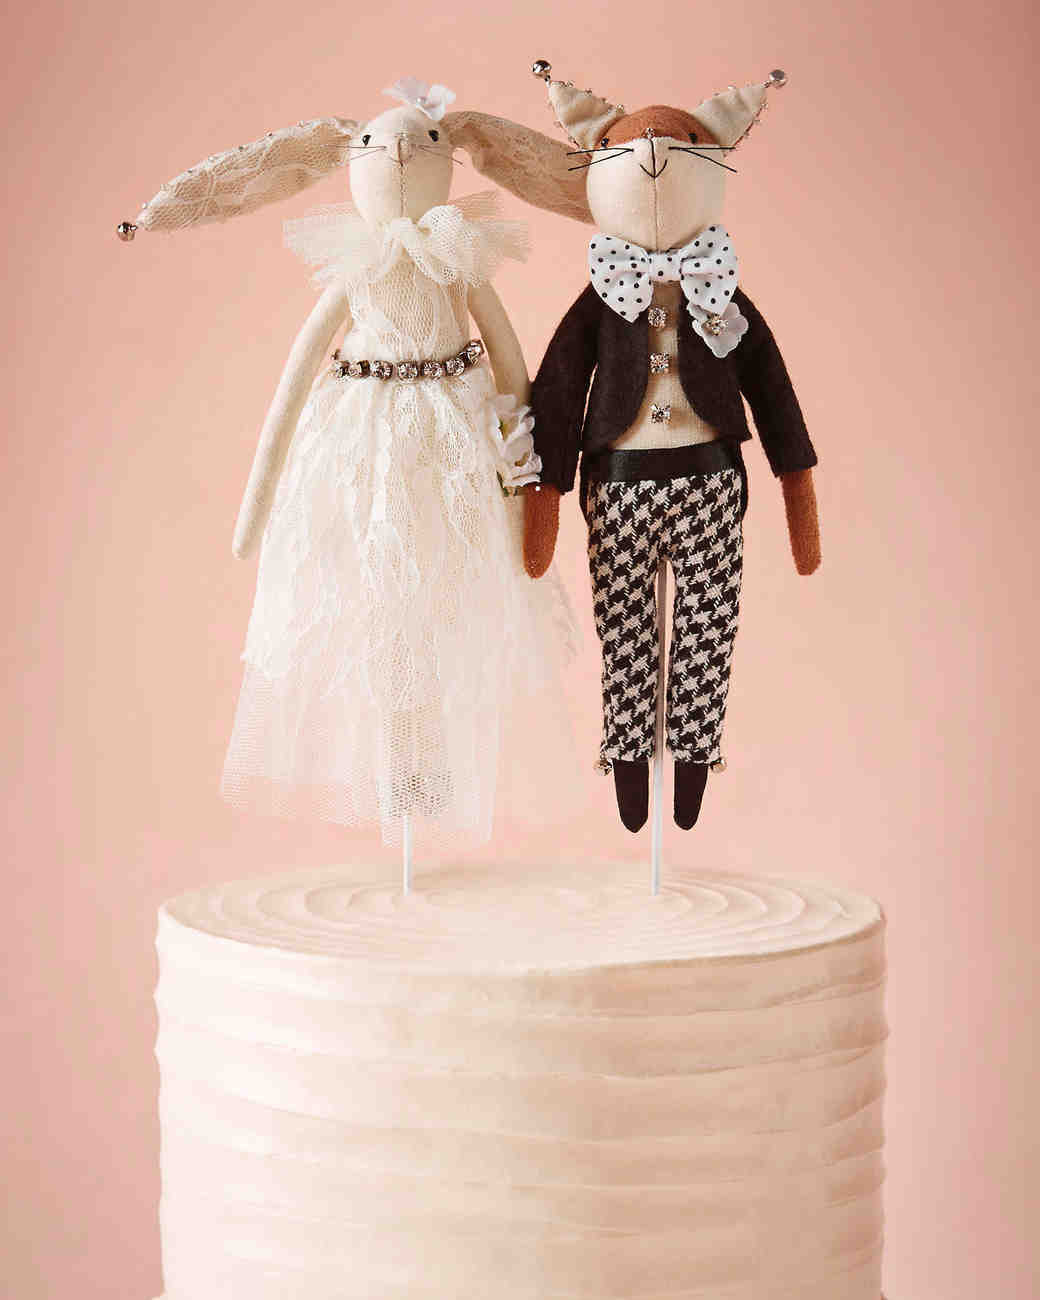 Custom Cake Toppers Wedding
 25 Unique Wedding Cake Toppers